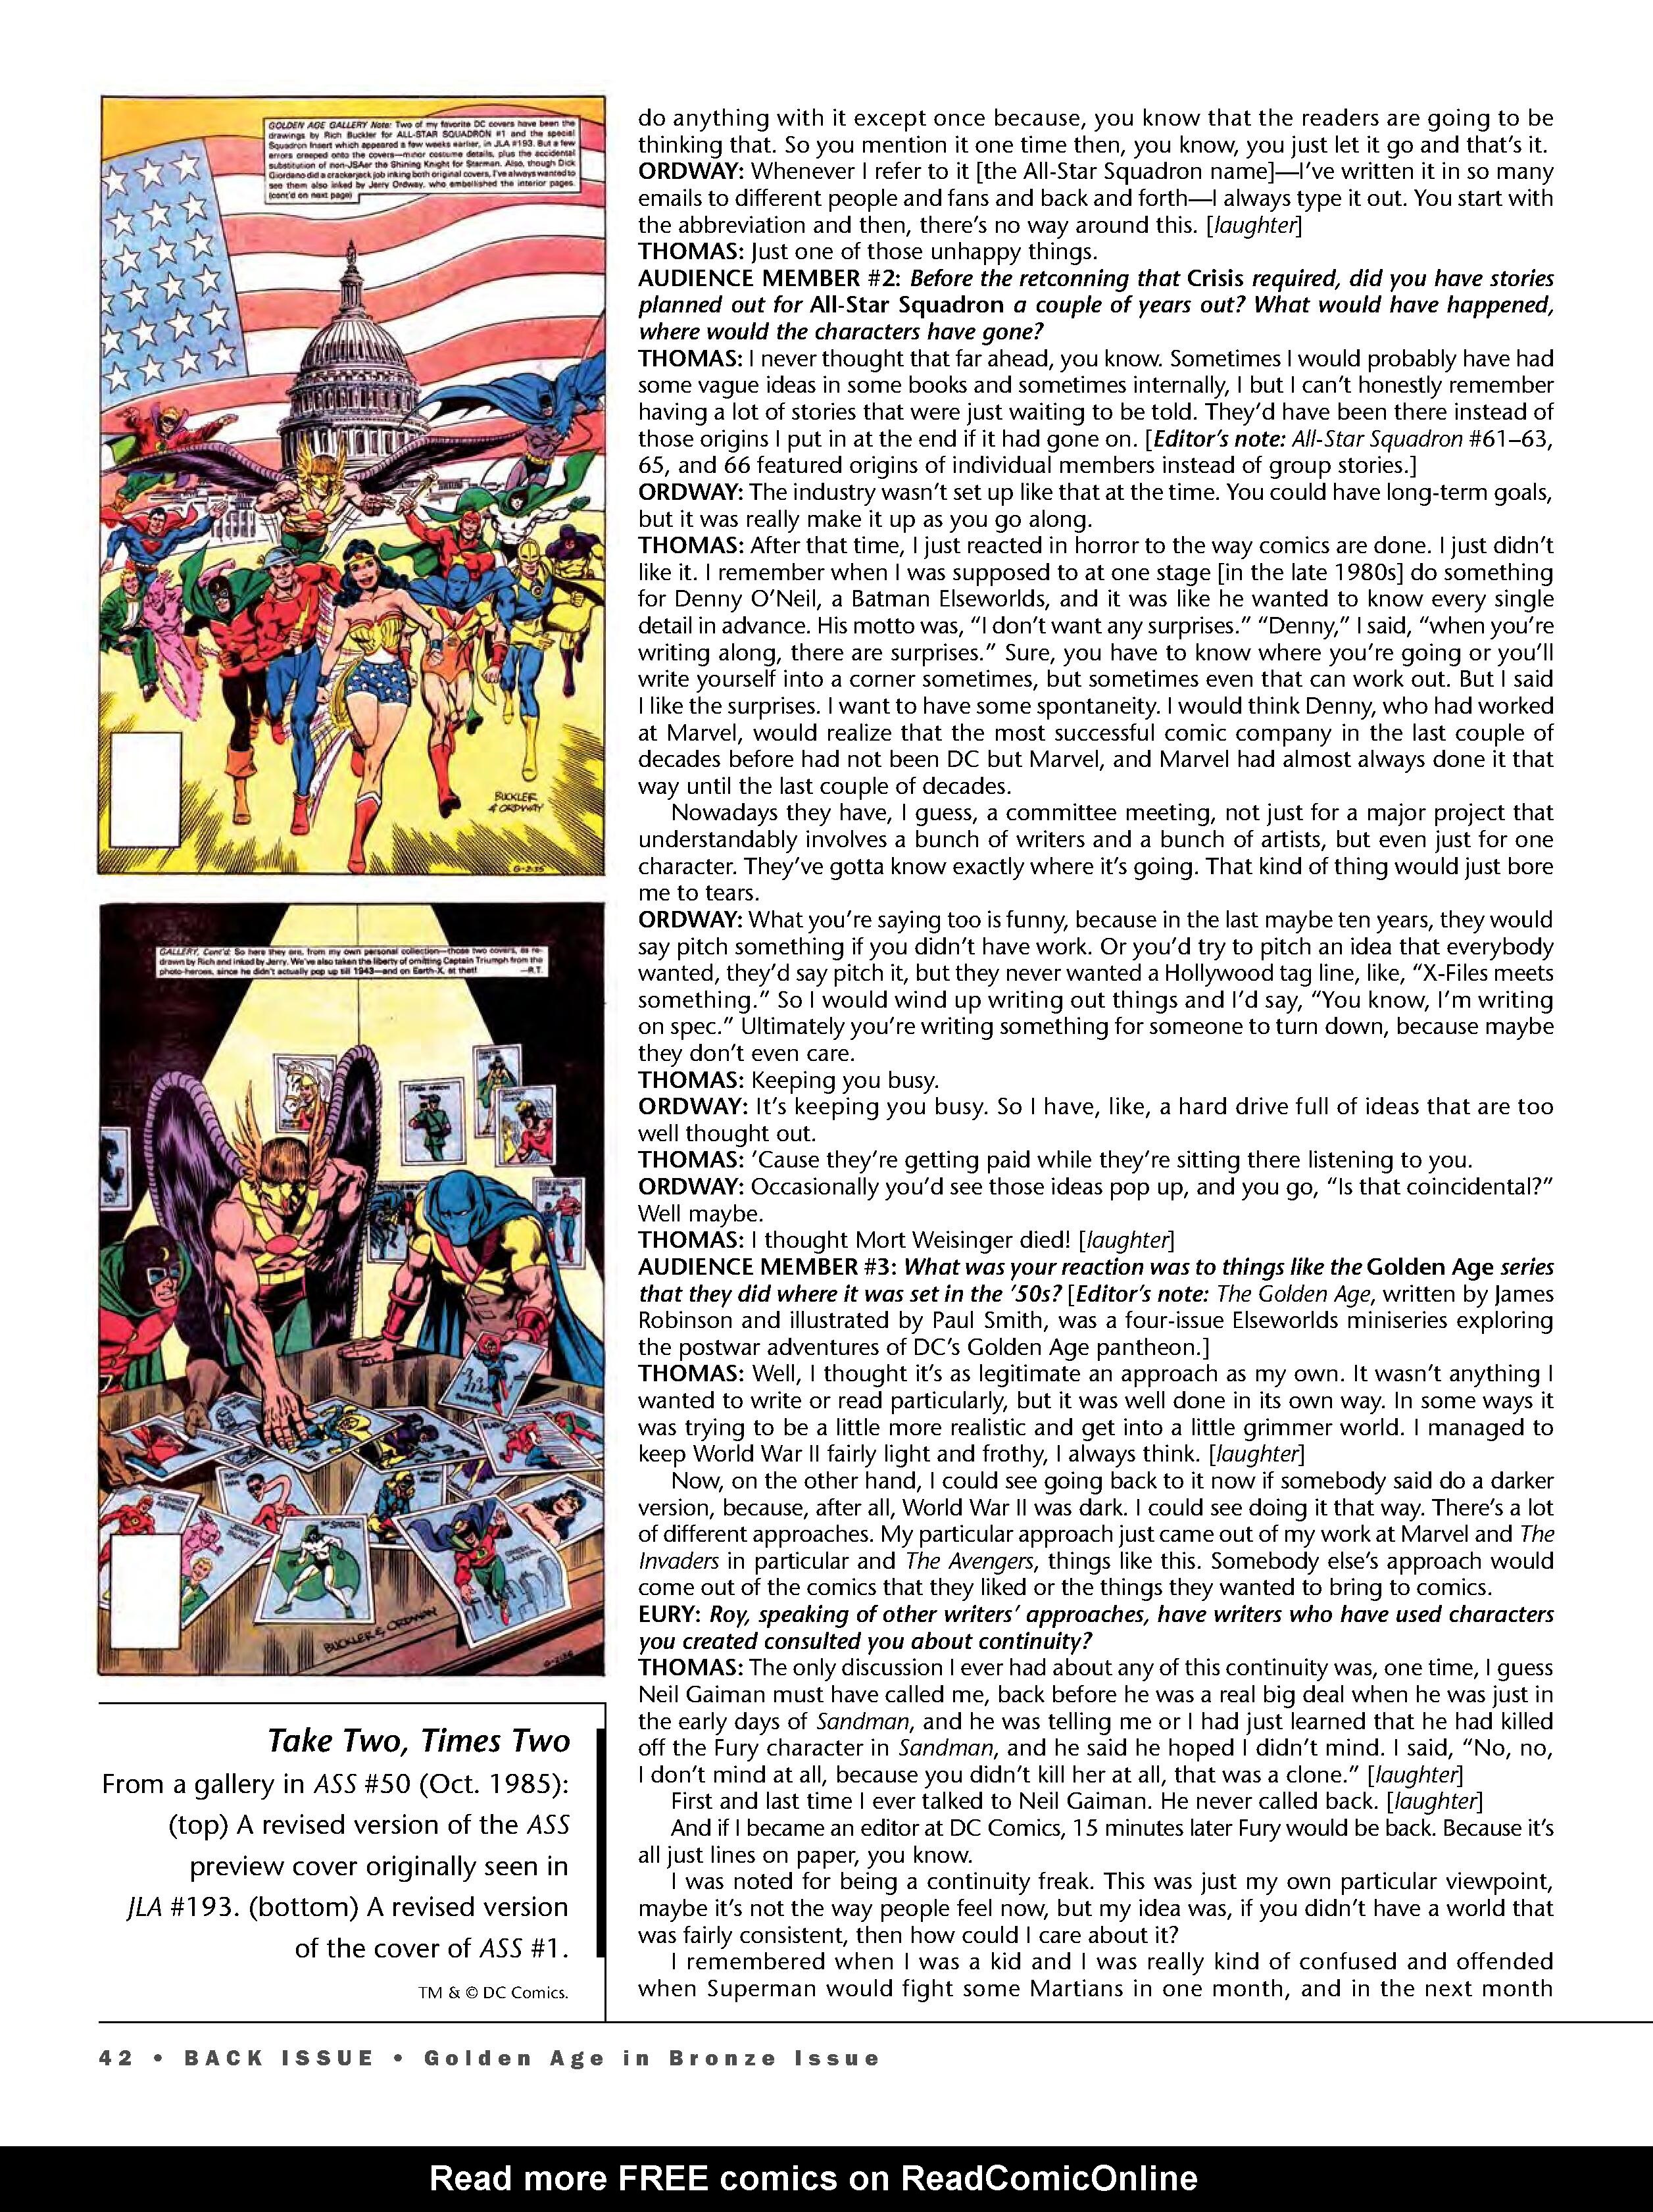 Read online Back Issue comic -  Issue #106 - 44